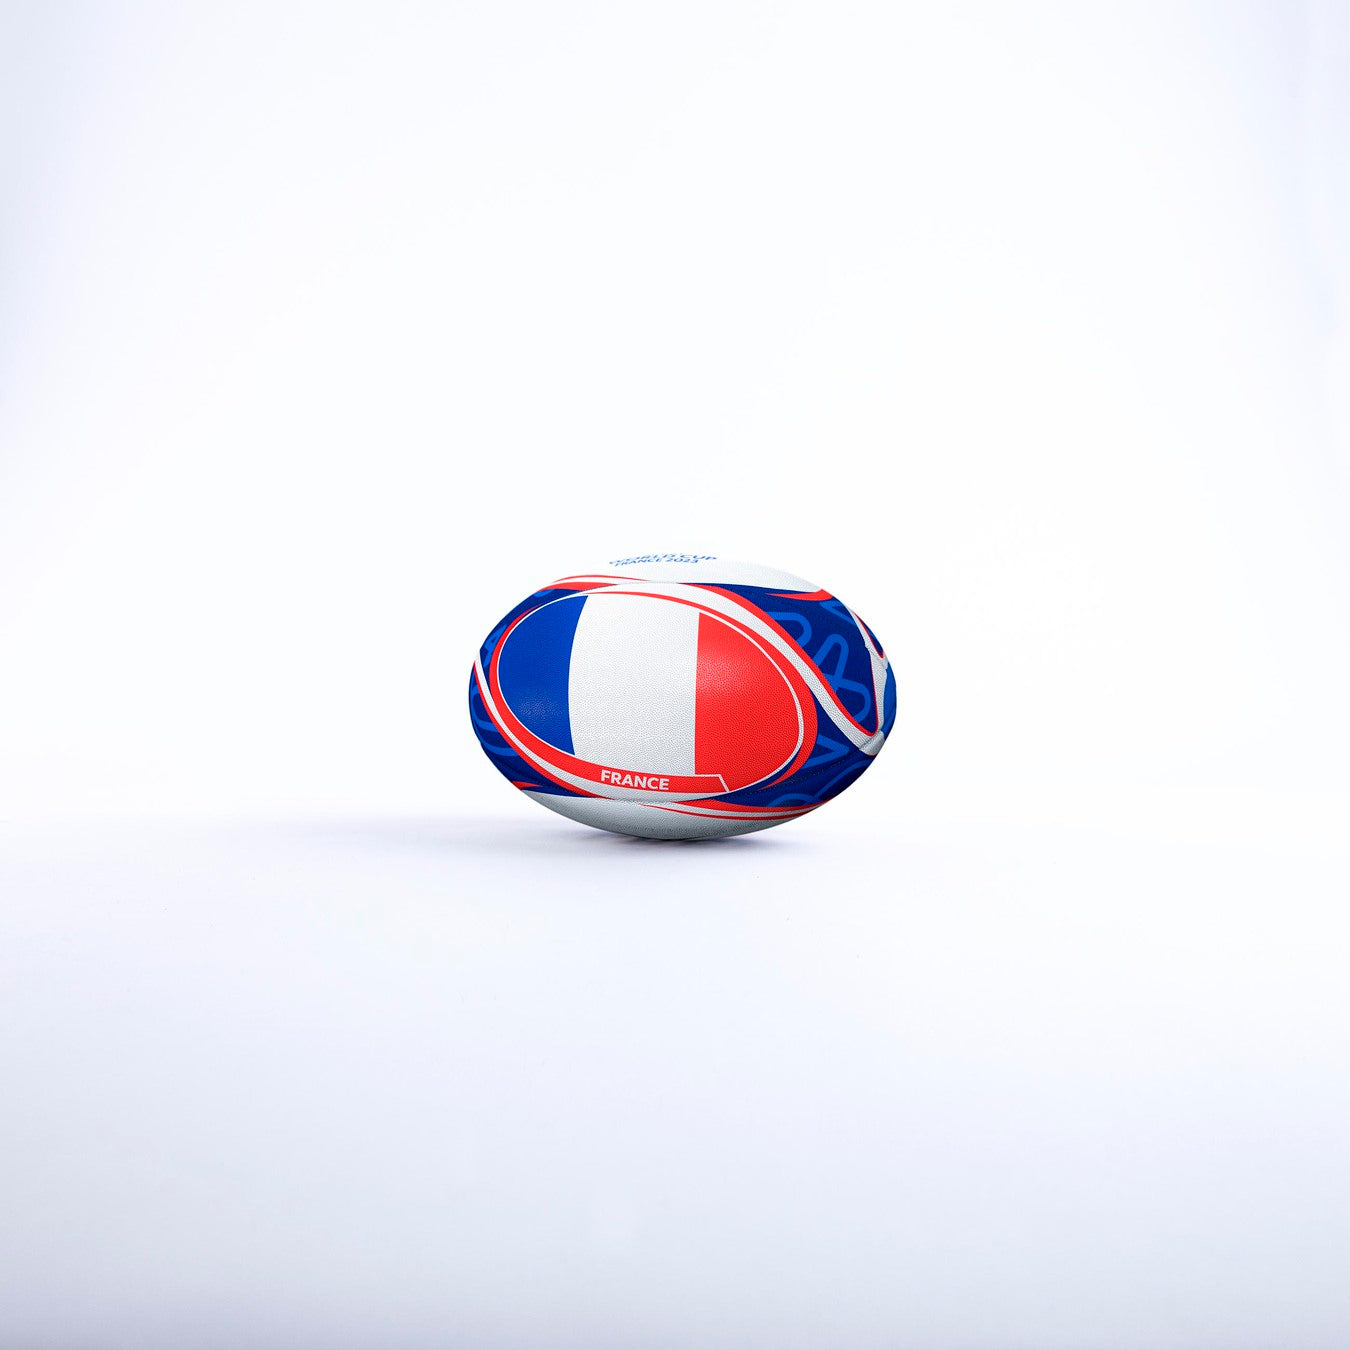 RRDE22Rugby World Cup RWC2023 France Flag Ball Size 5 Main